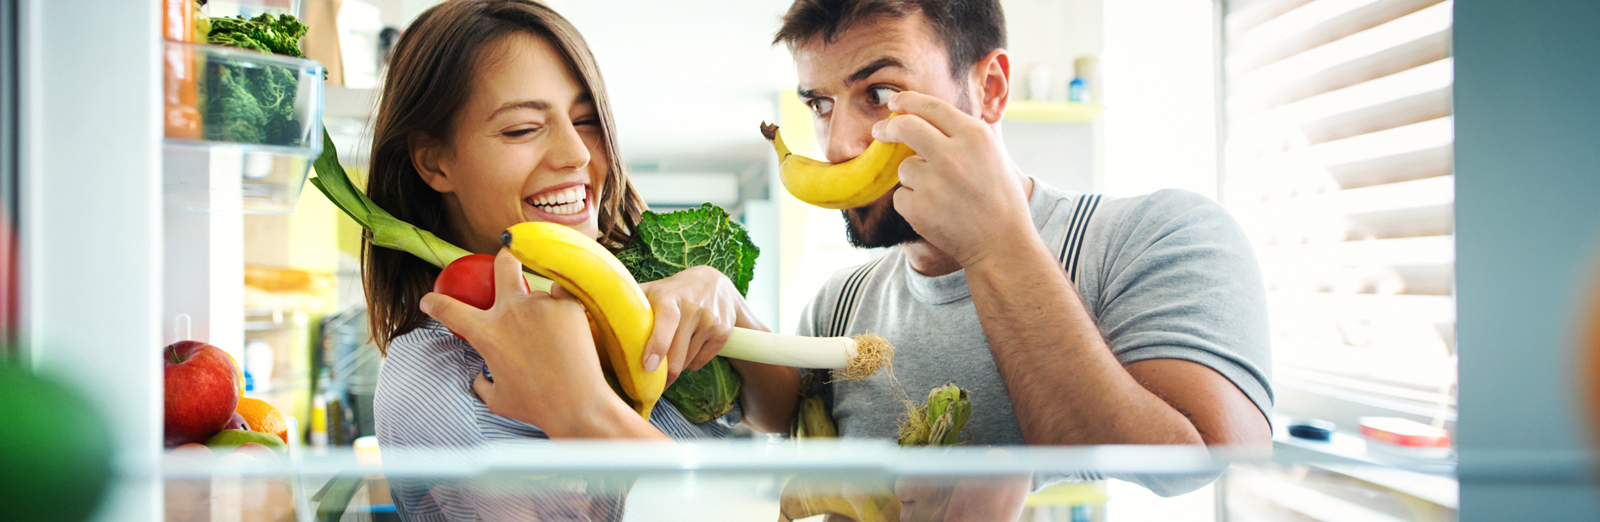 couple-looking-in-fridge-1600x522.png